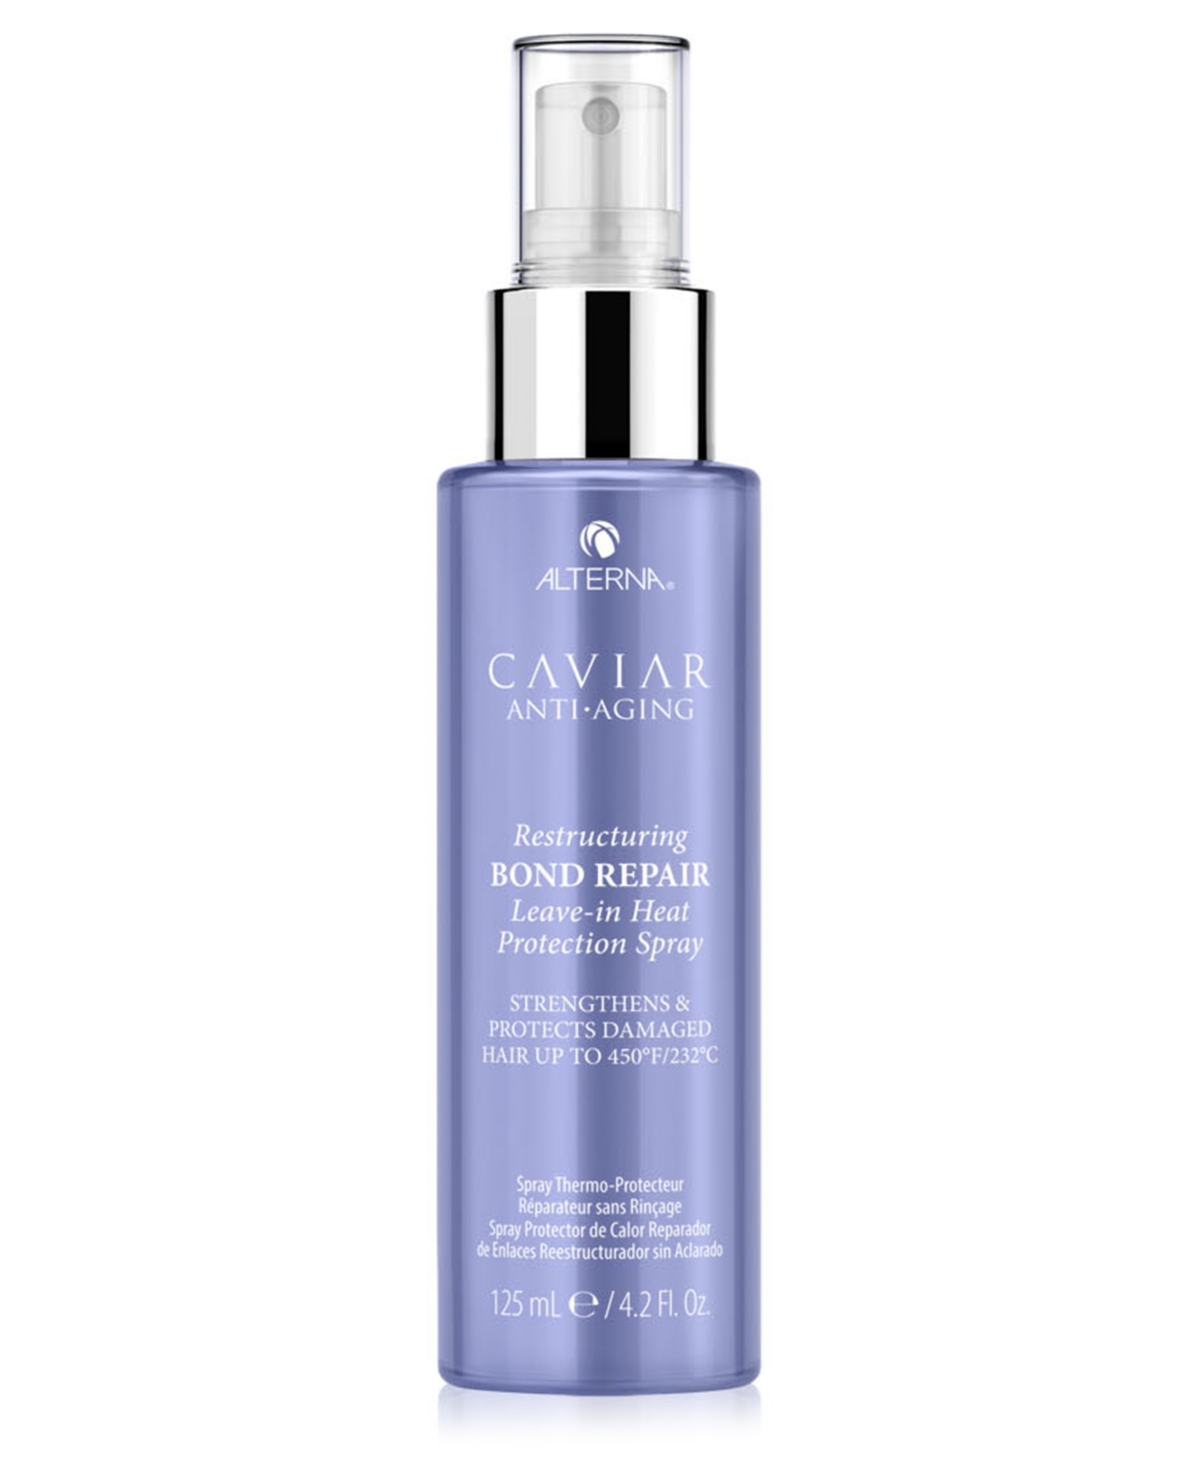 Caviar Anti-Aging Restructuring Bond Repair Leave-In Heat Protection Spray, 4.2-oz.